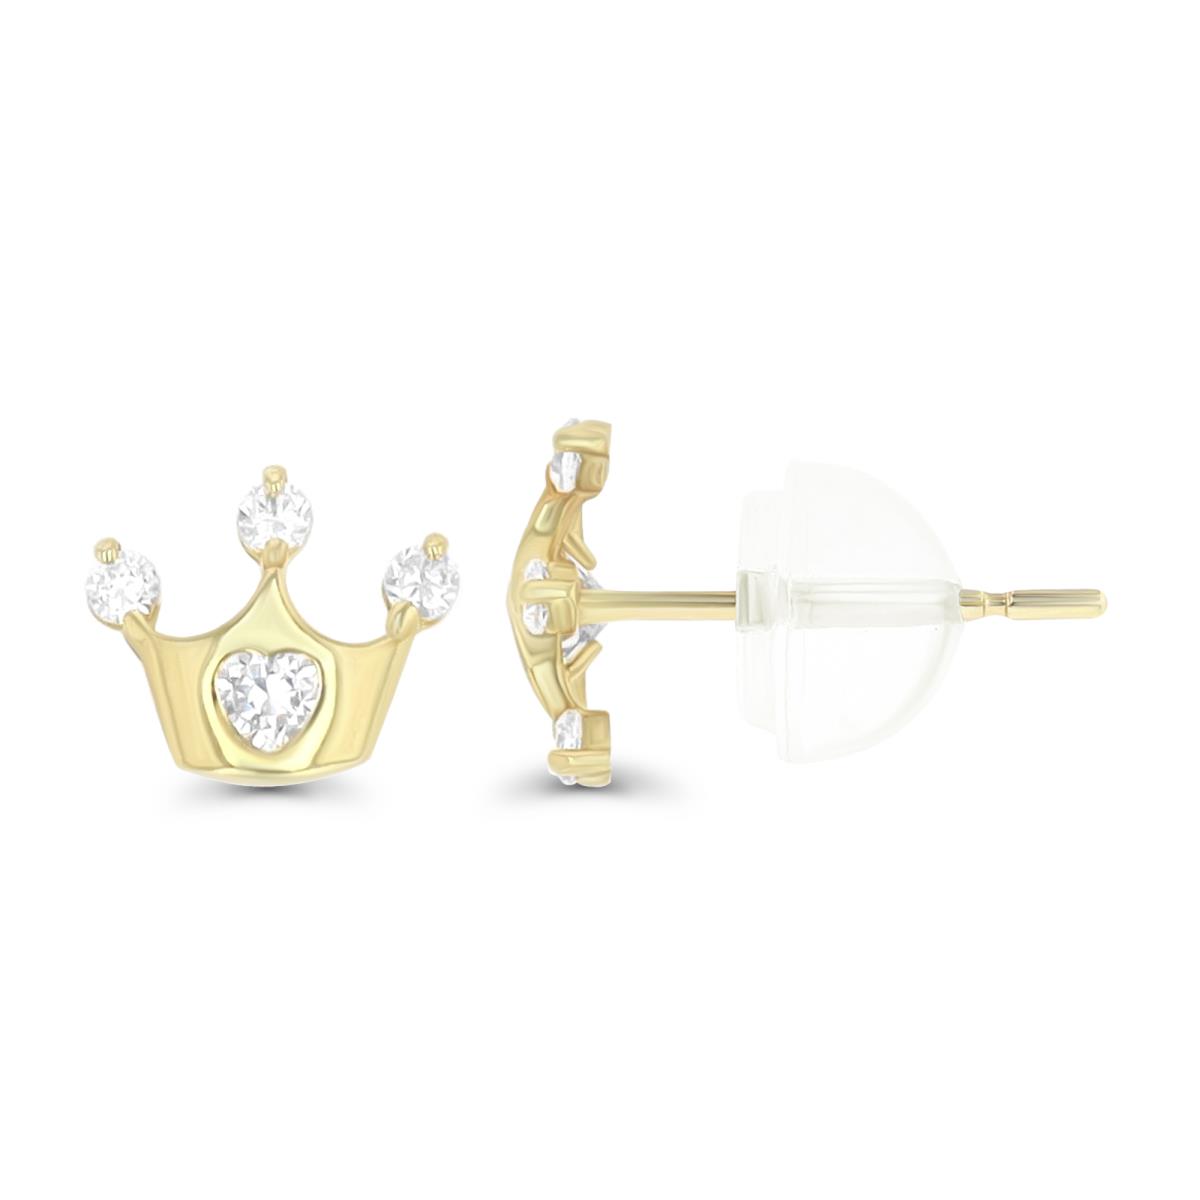 10K Yellow Gold 7.5x6.5mm Round and Heart Cut Crown Stud Earring